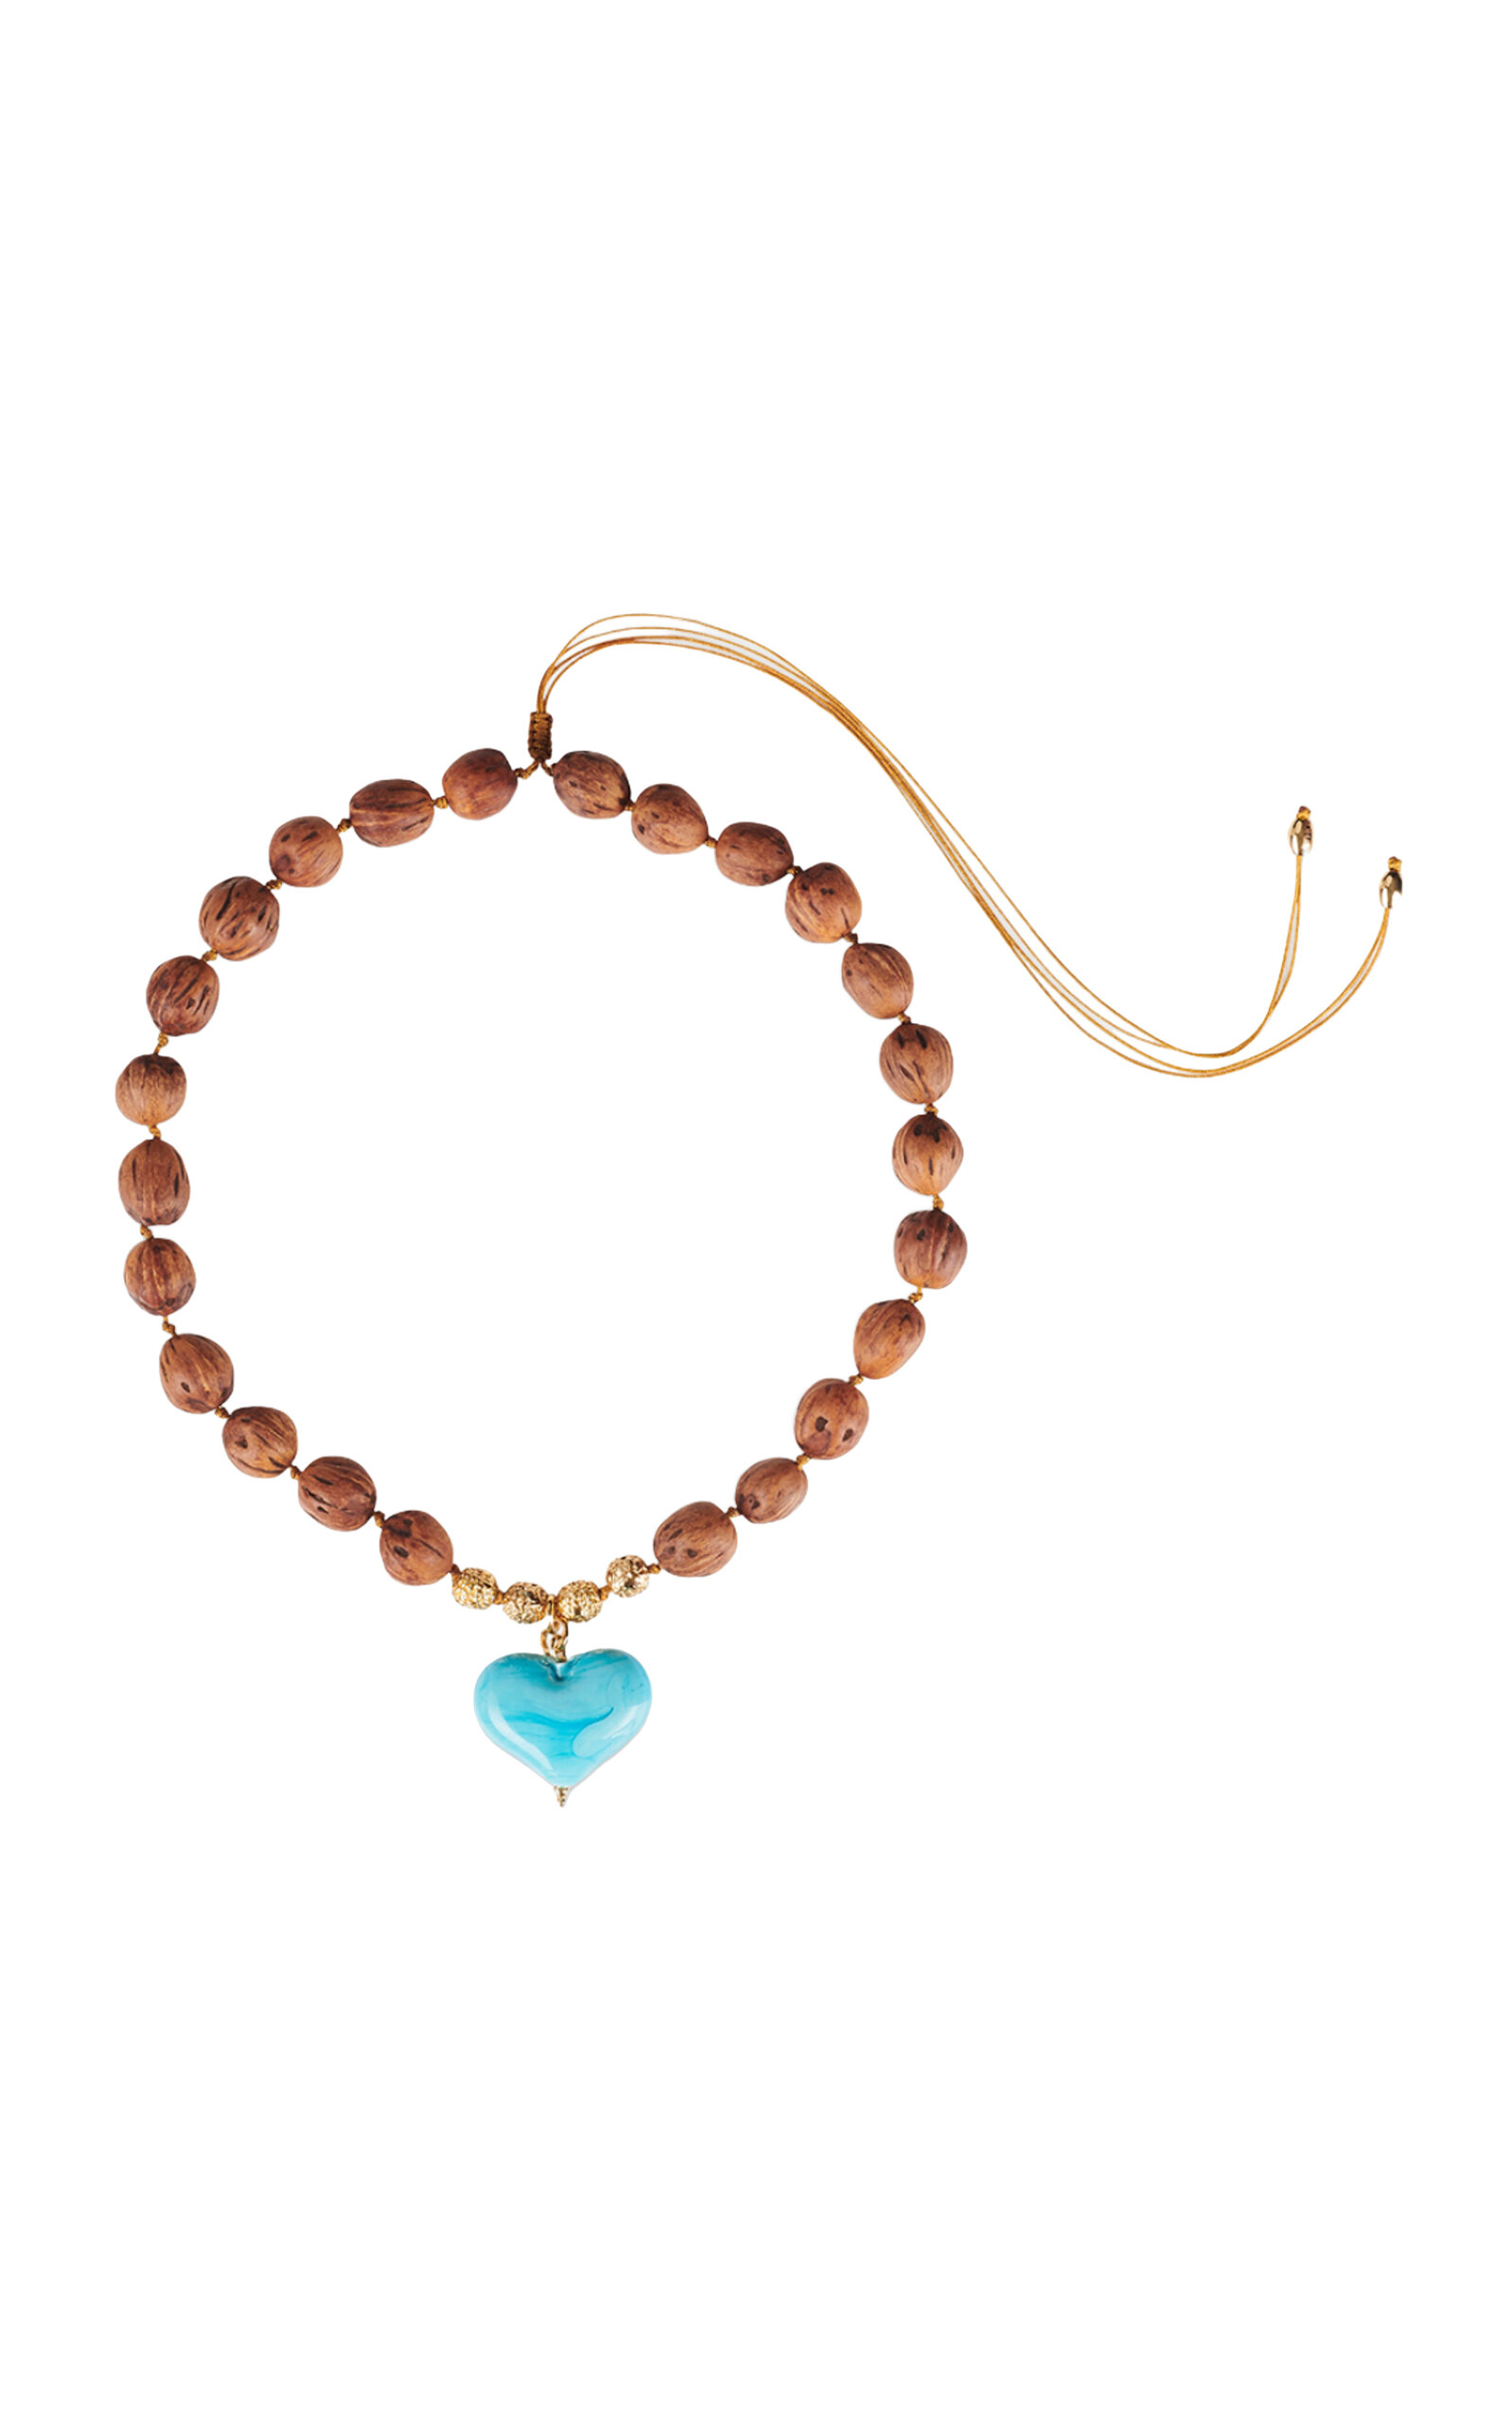 Cuore Resort Wooden Beads Pendant Necklace